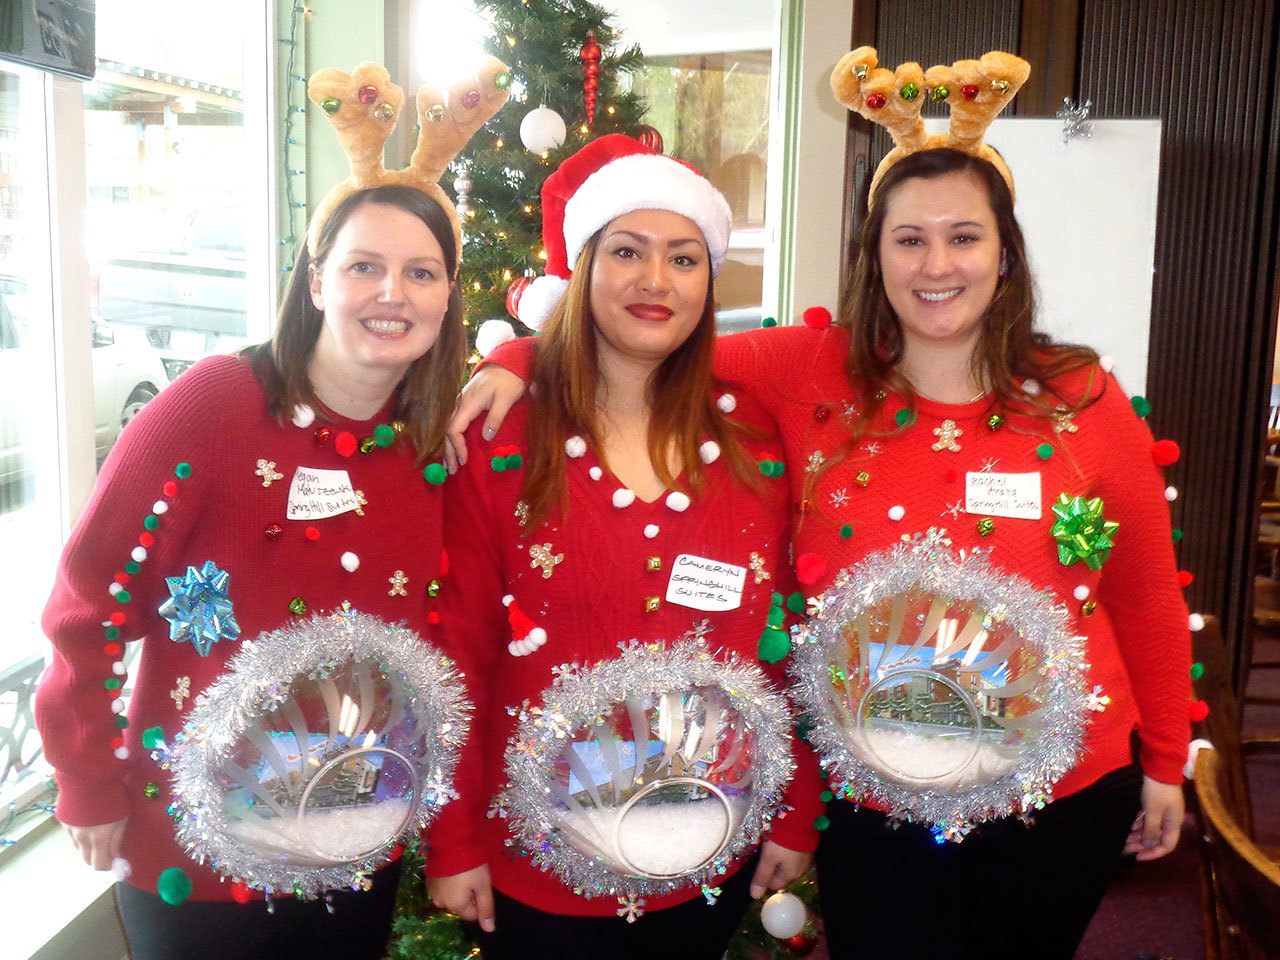 Megan Matuszewski, Cameryn Mirafuentes and Rachel Arata of the Springhill Suites Marriott won the prize for having the ugliest festive sweaters. They said that they made their snowglobe costumes themselves in only a couple of hours. Nicole Jennings/staff photo